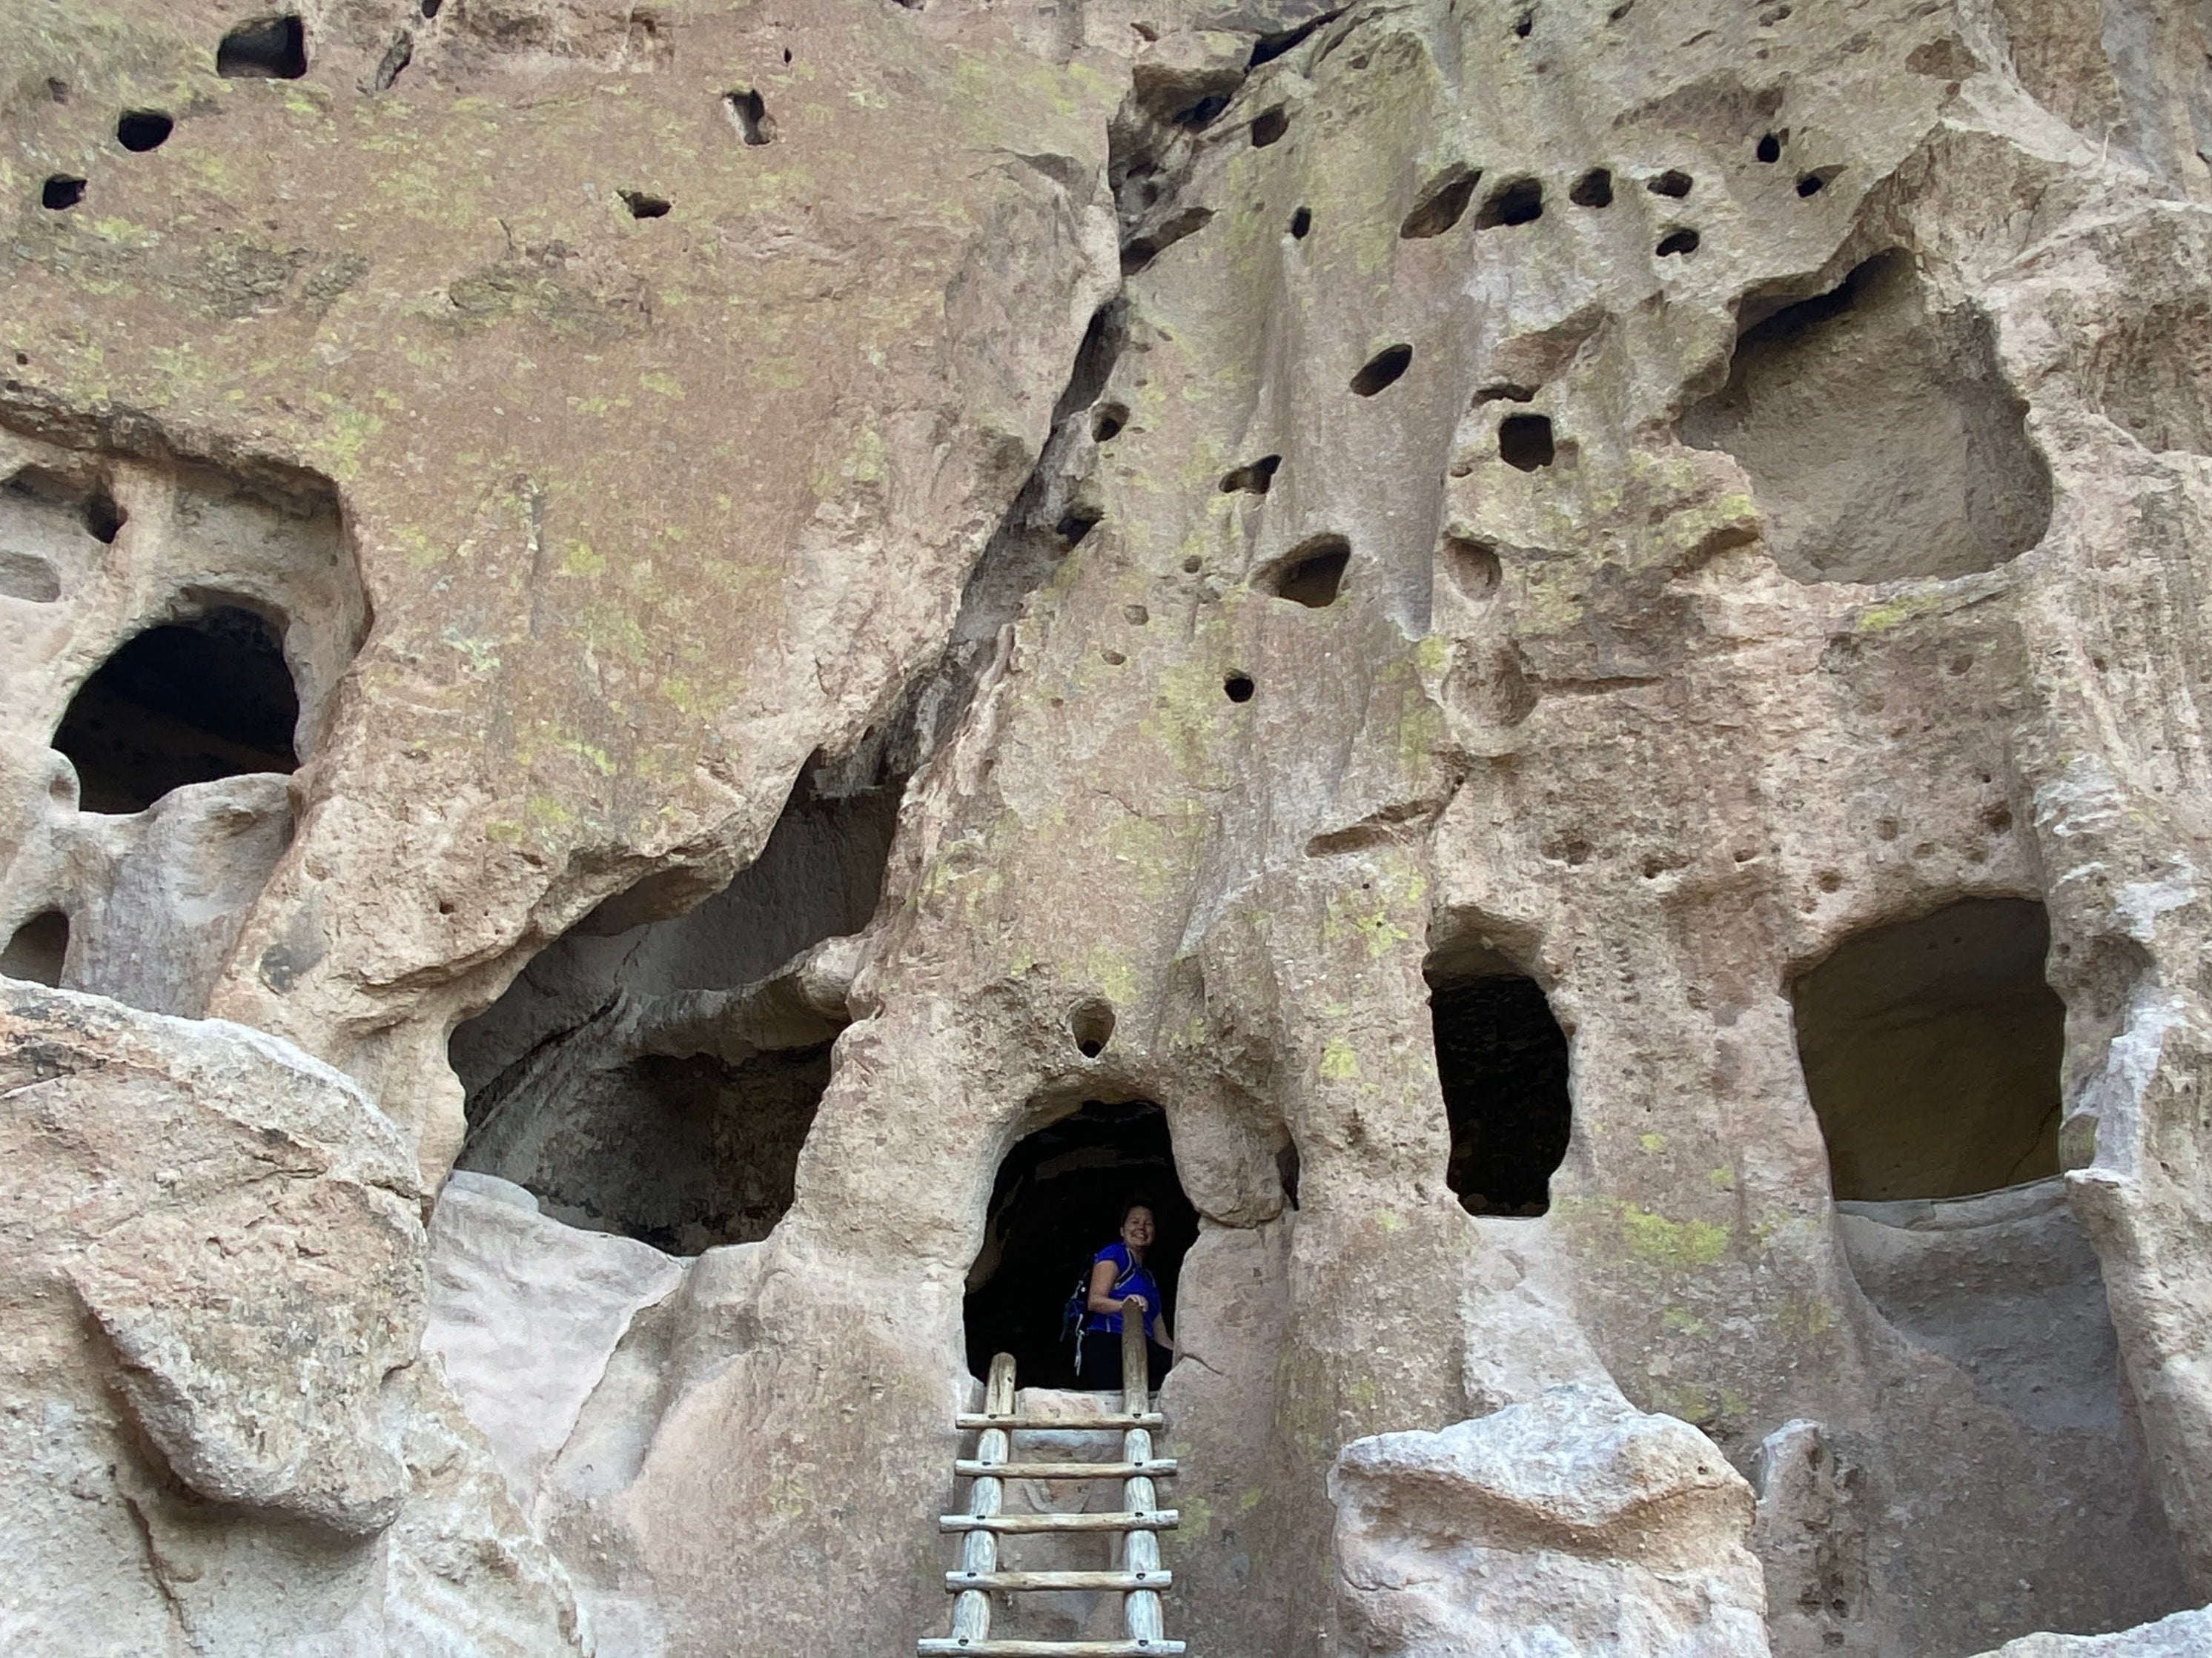 Cliff dwellings at Bandelier National Monument